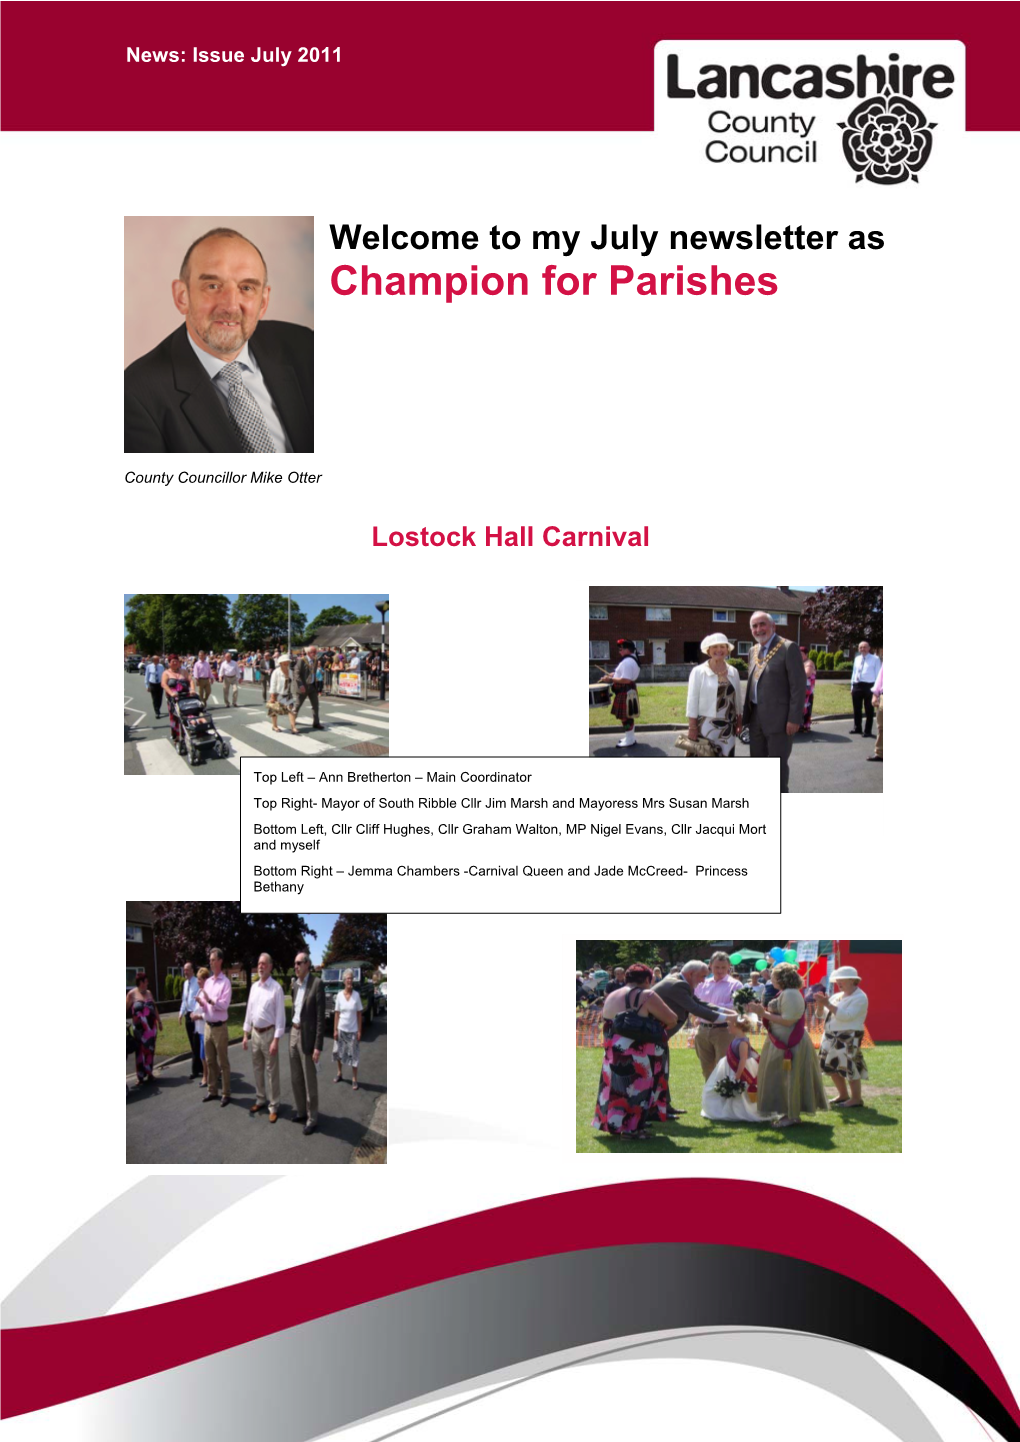 My July Newsletter As Champion for Parishes